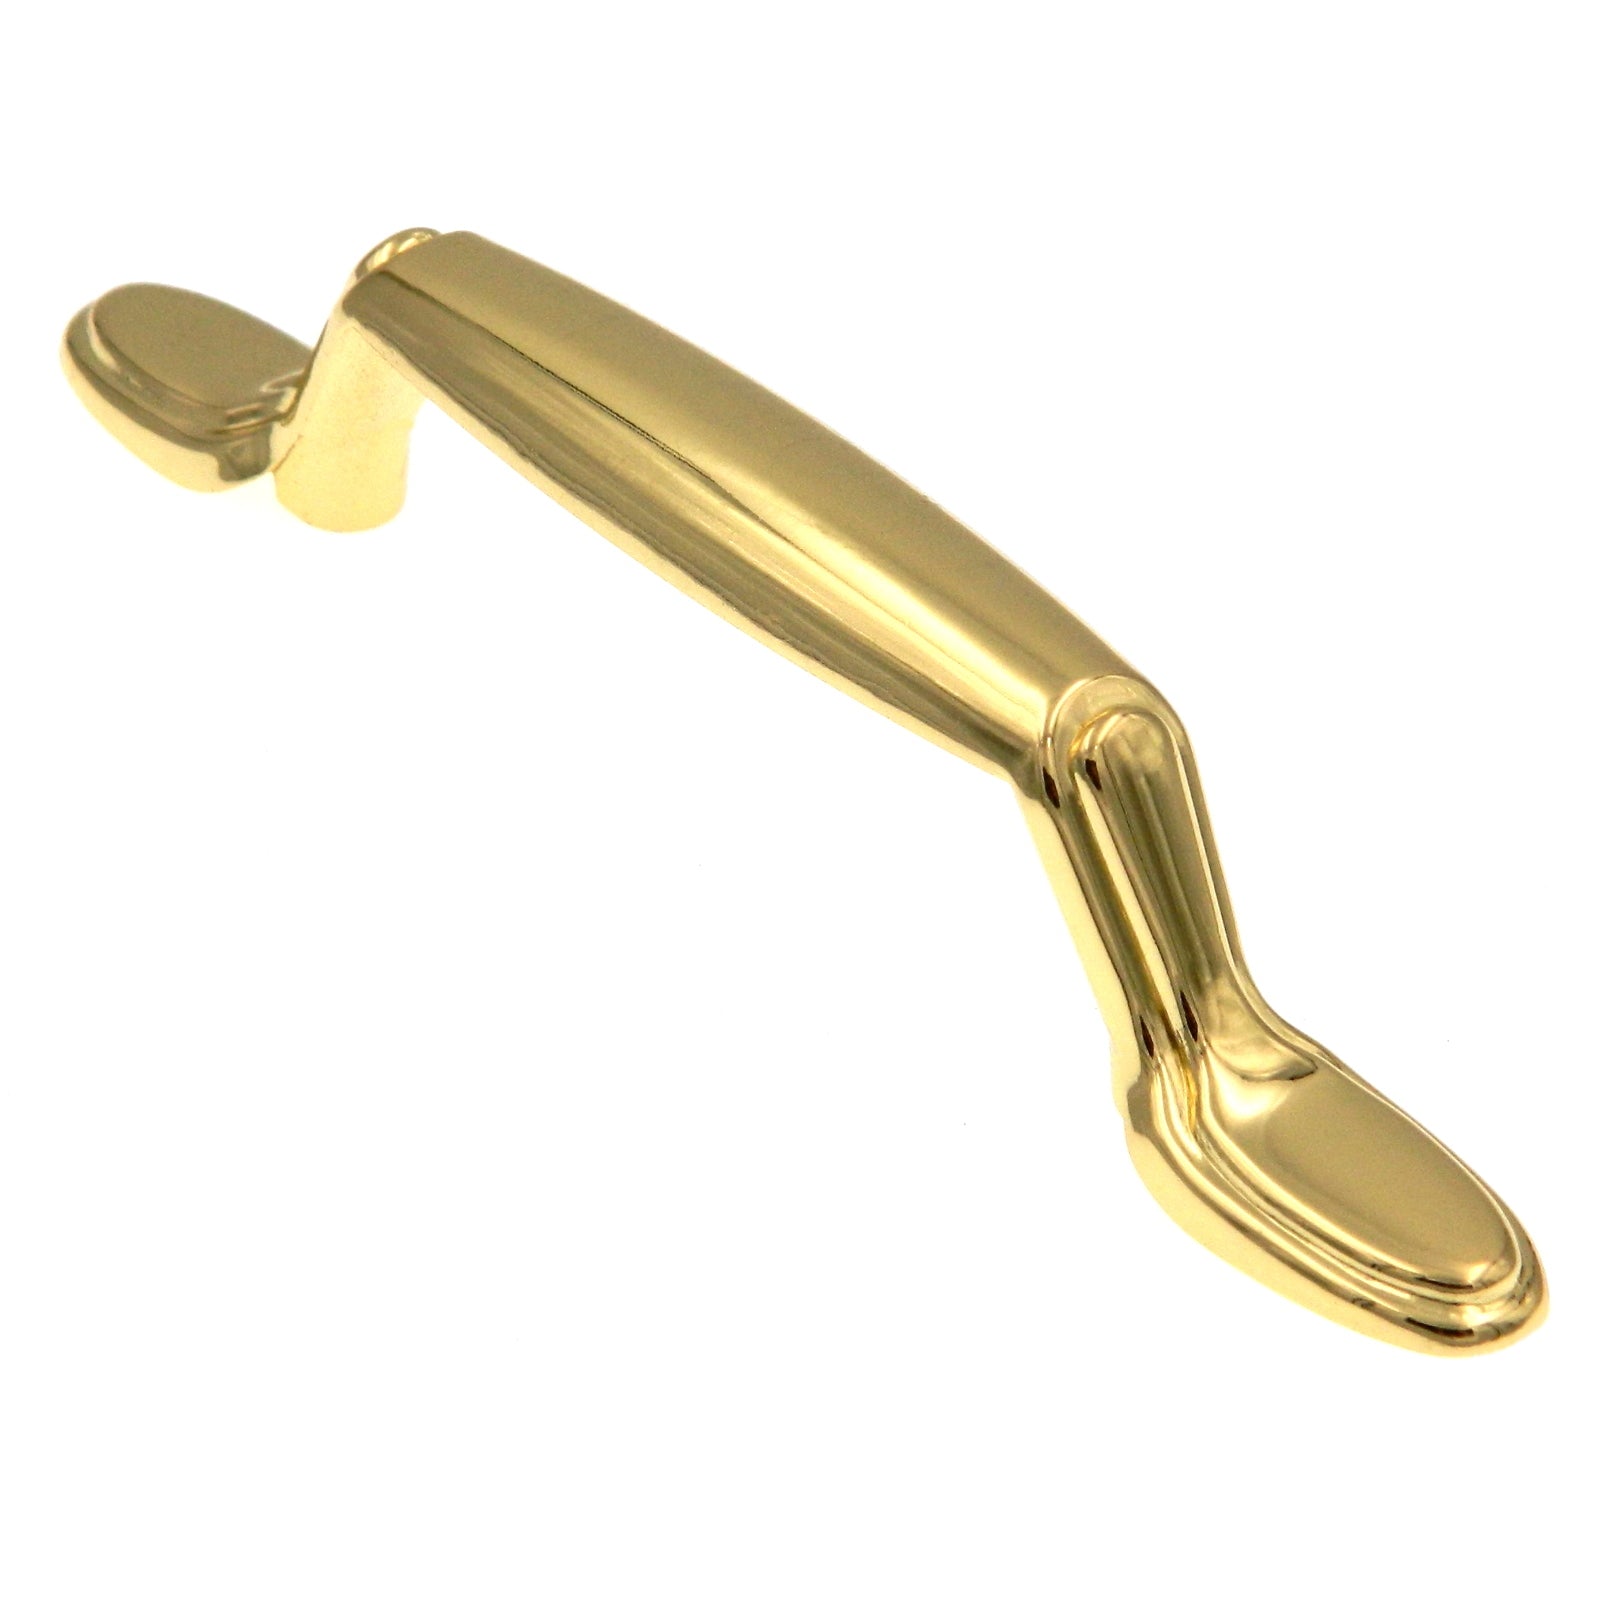 30 Pack Amerock Allison 254PB Polished Brass 3"cc Arch Smooth Cabinet Handle Pull